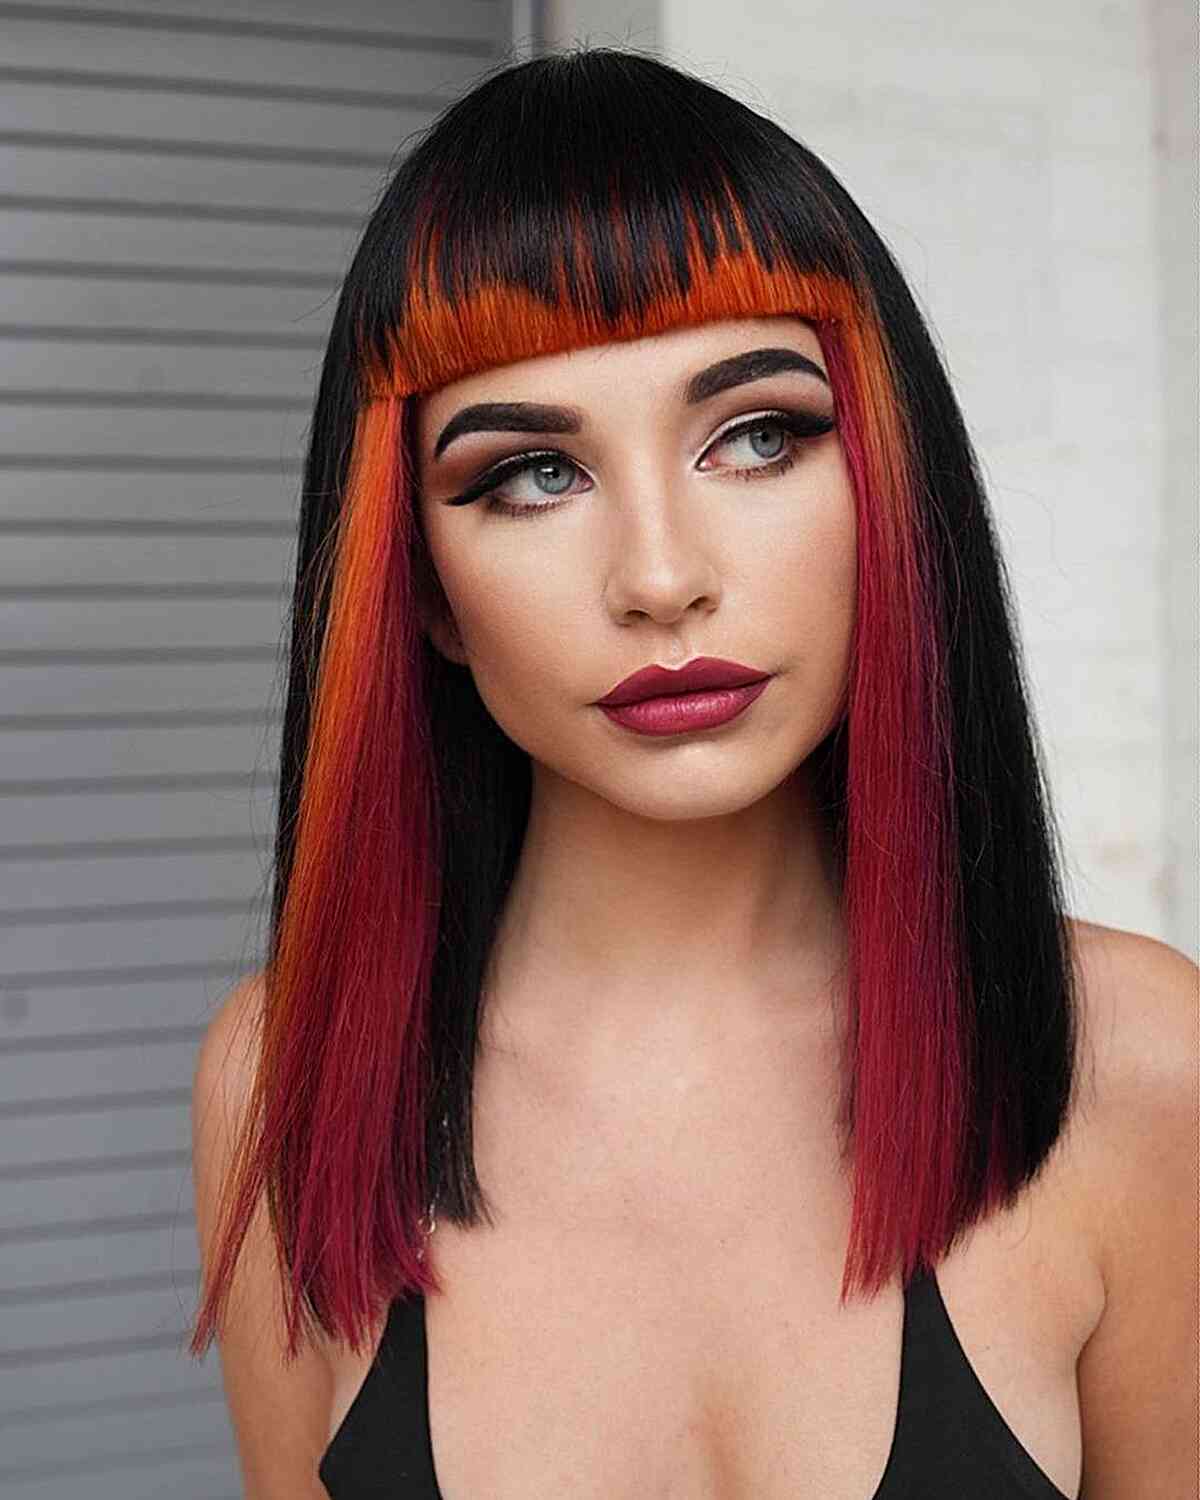 Edgy Black Hair with Red and Orange Money Pieces